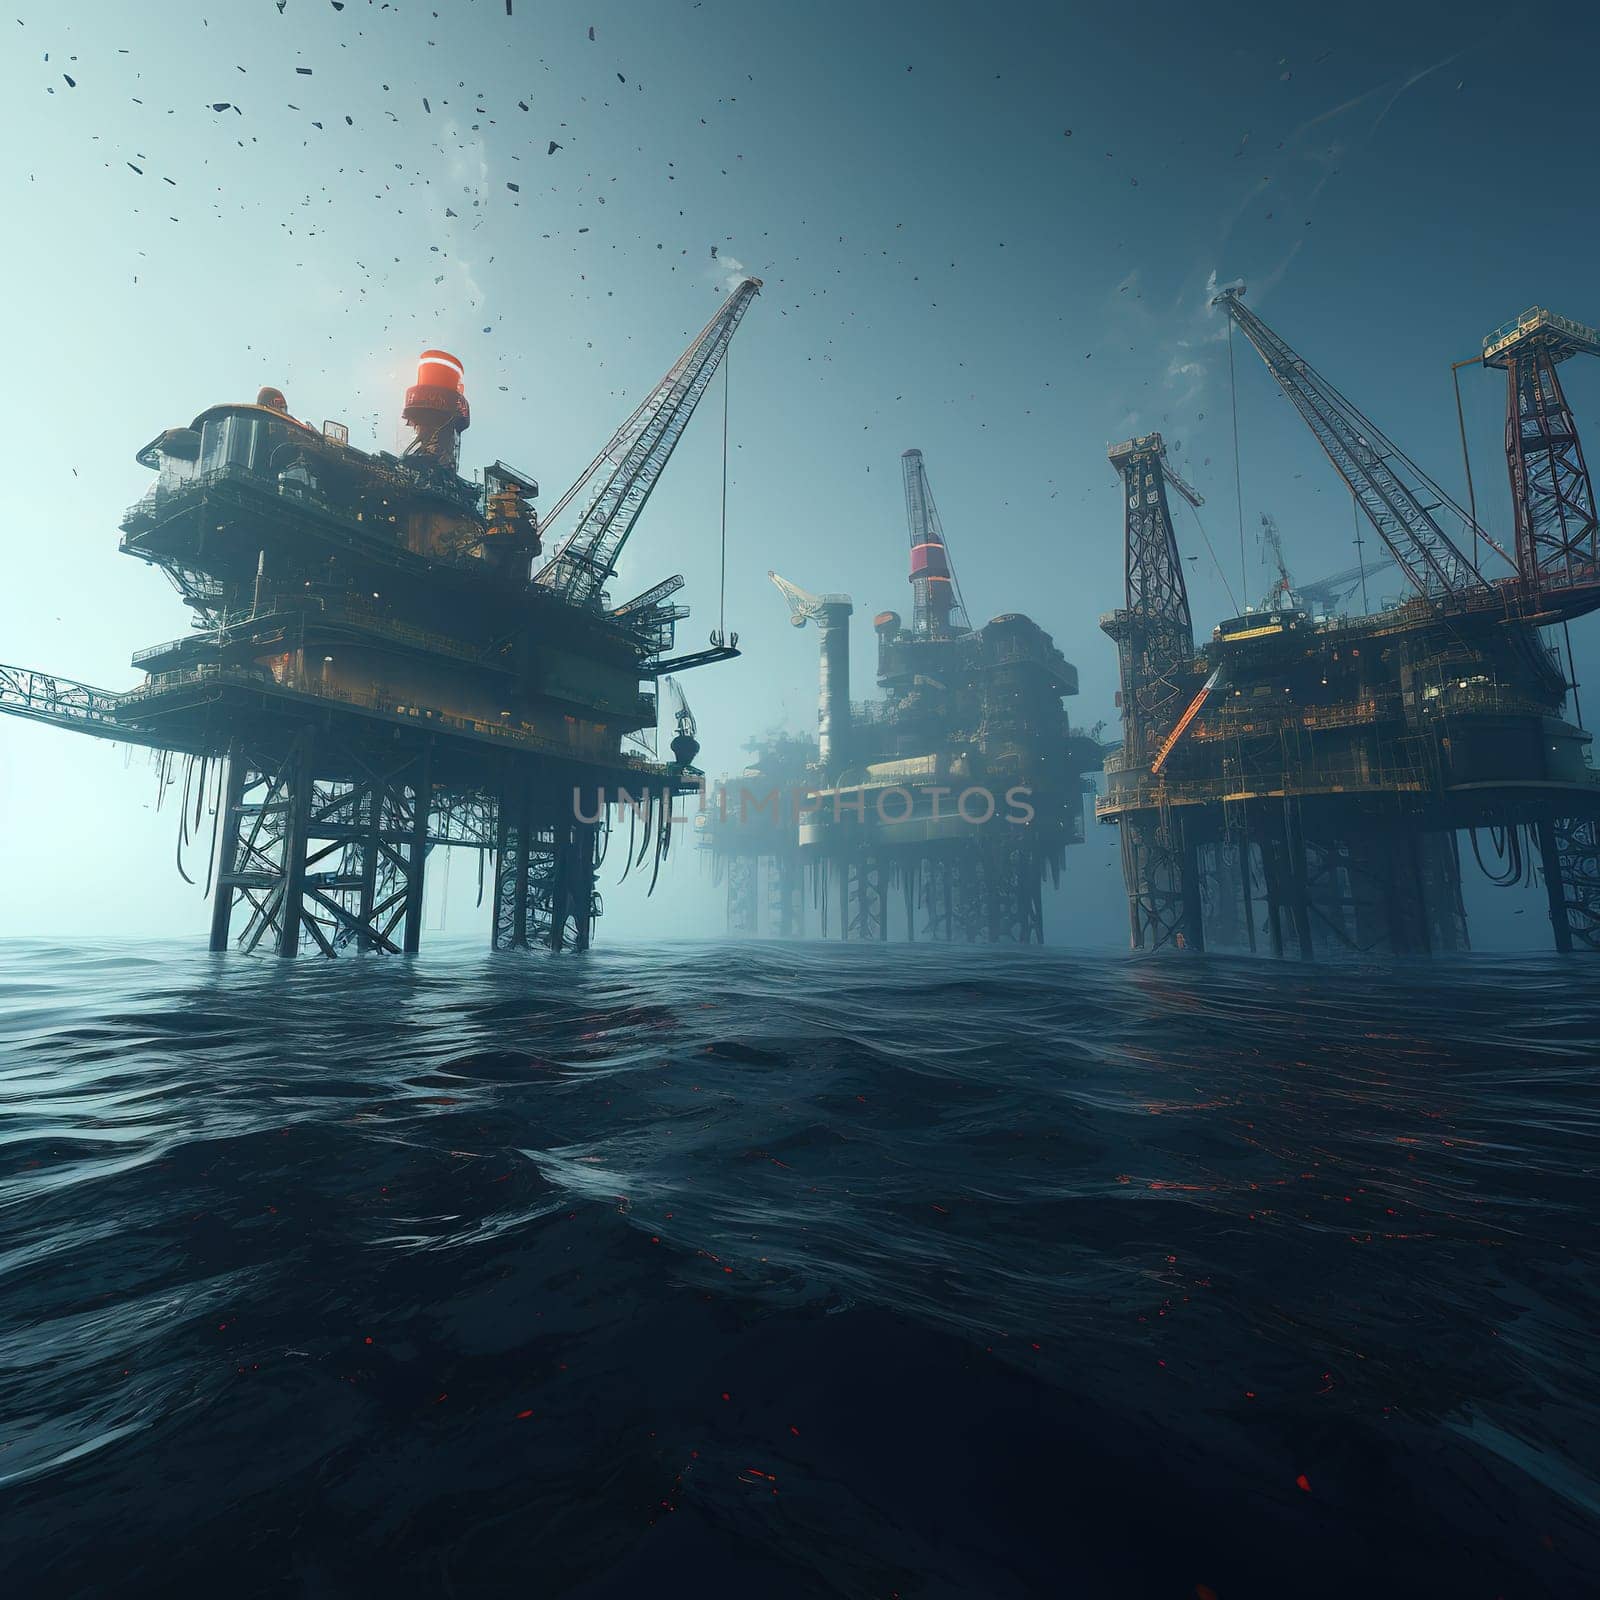 An oil platforms in the ocean, oil drilling from the bottom of the ocean, industrial concept